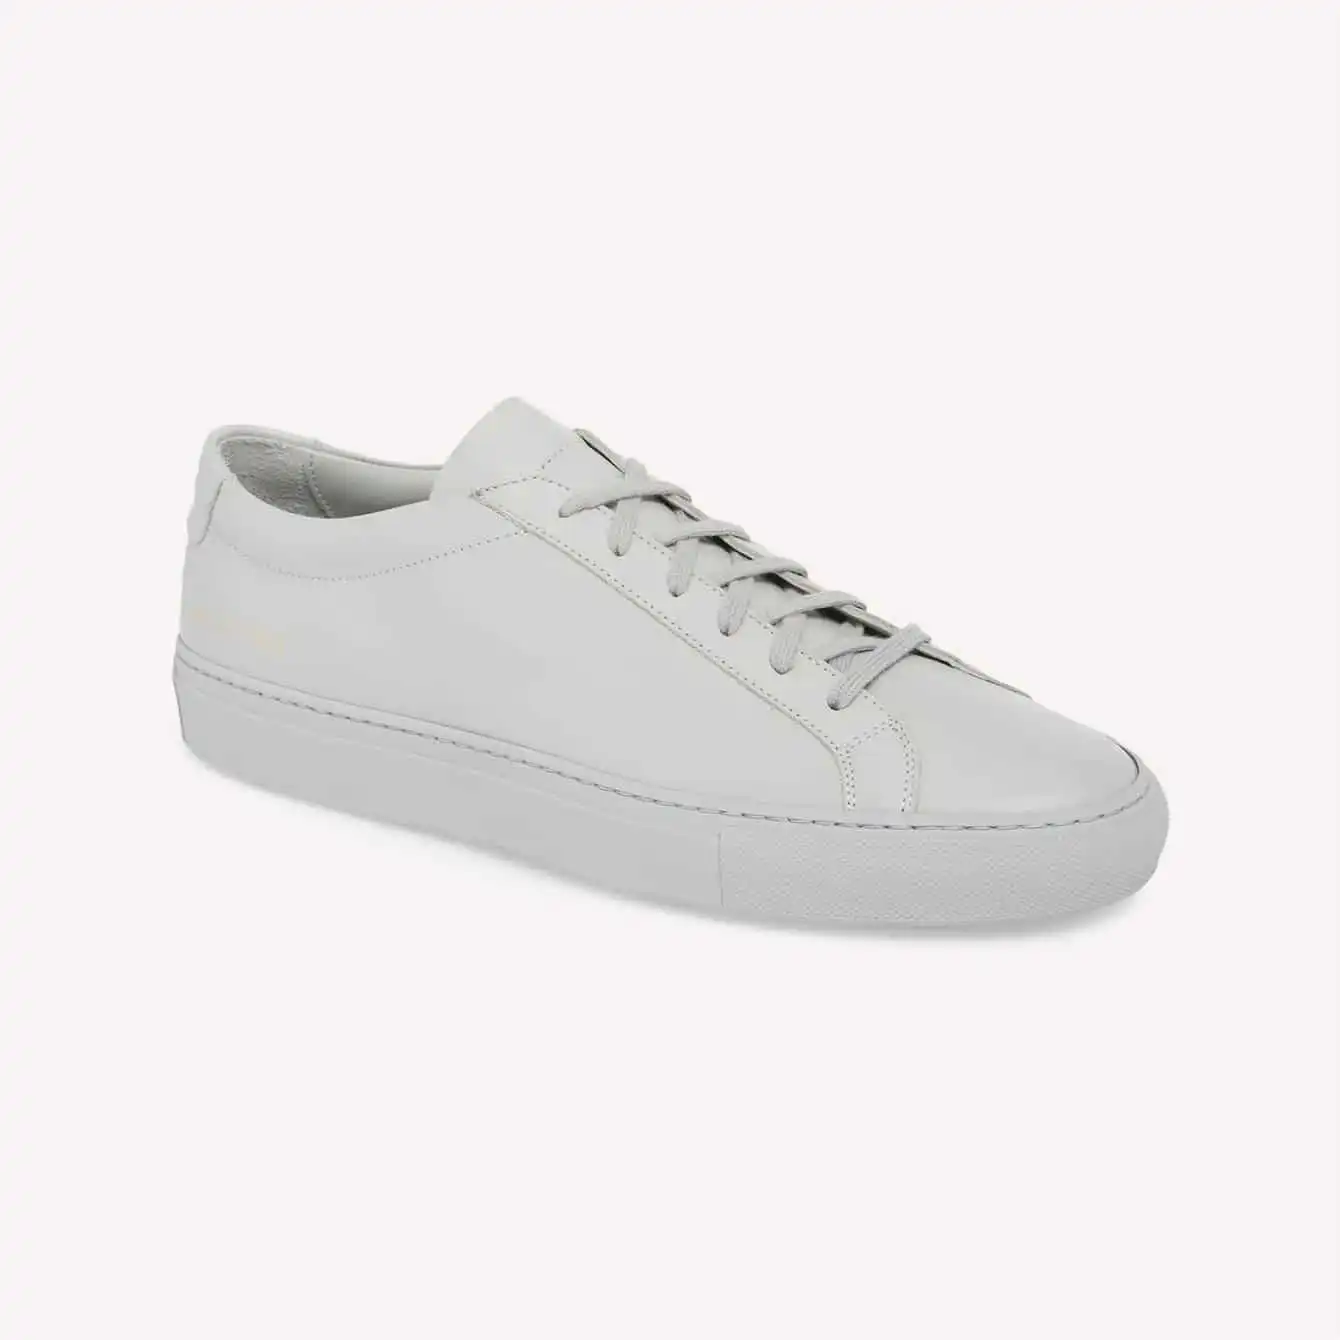 Common Projects - Original Achilles Leather Sneaker